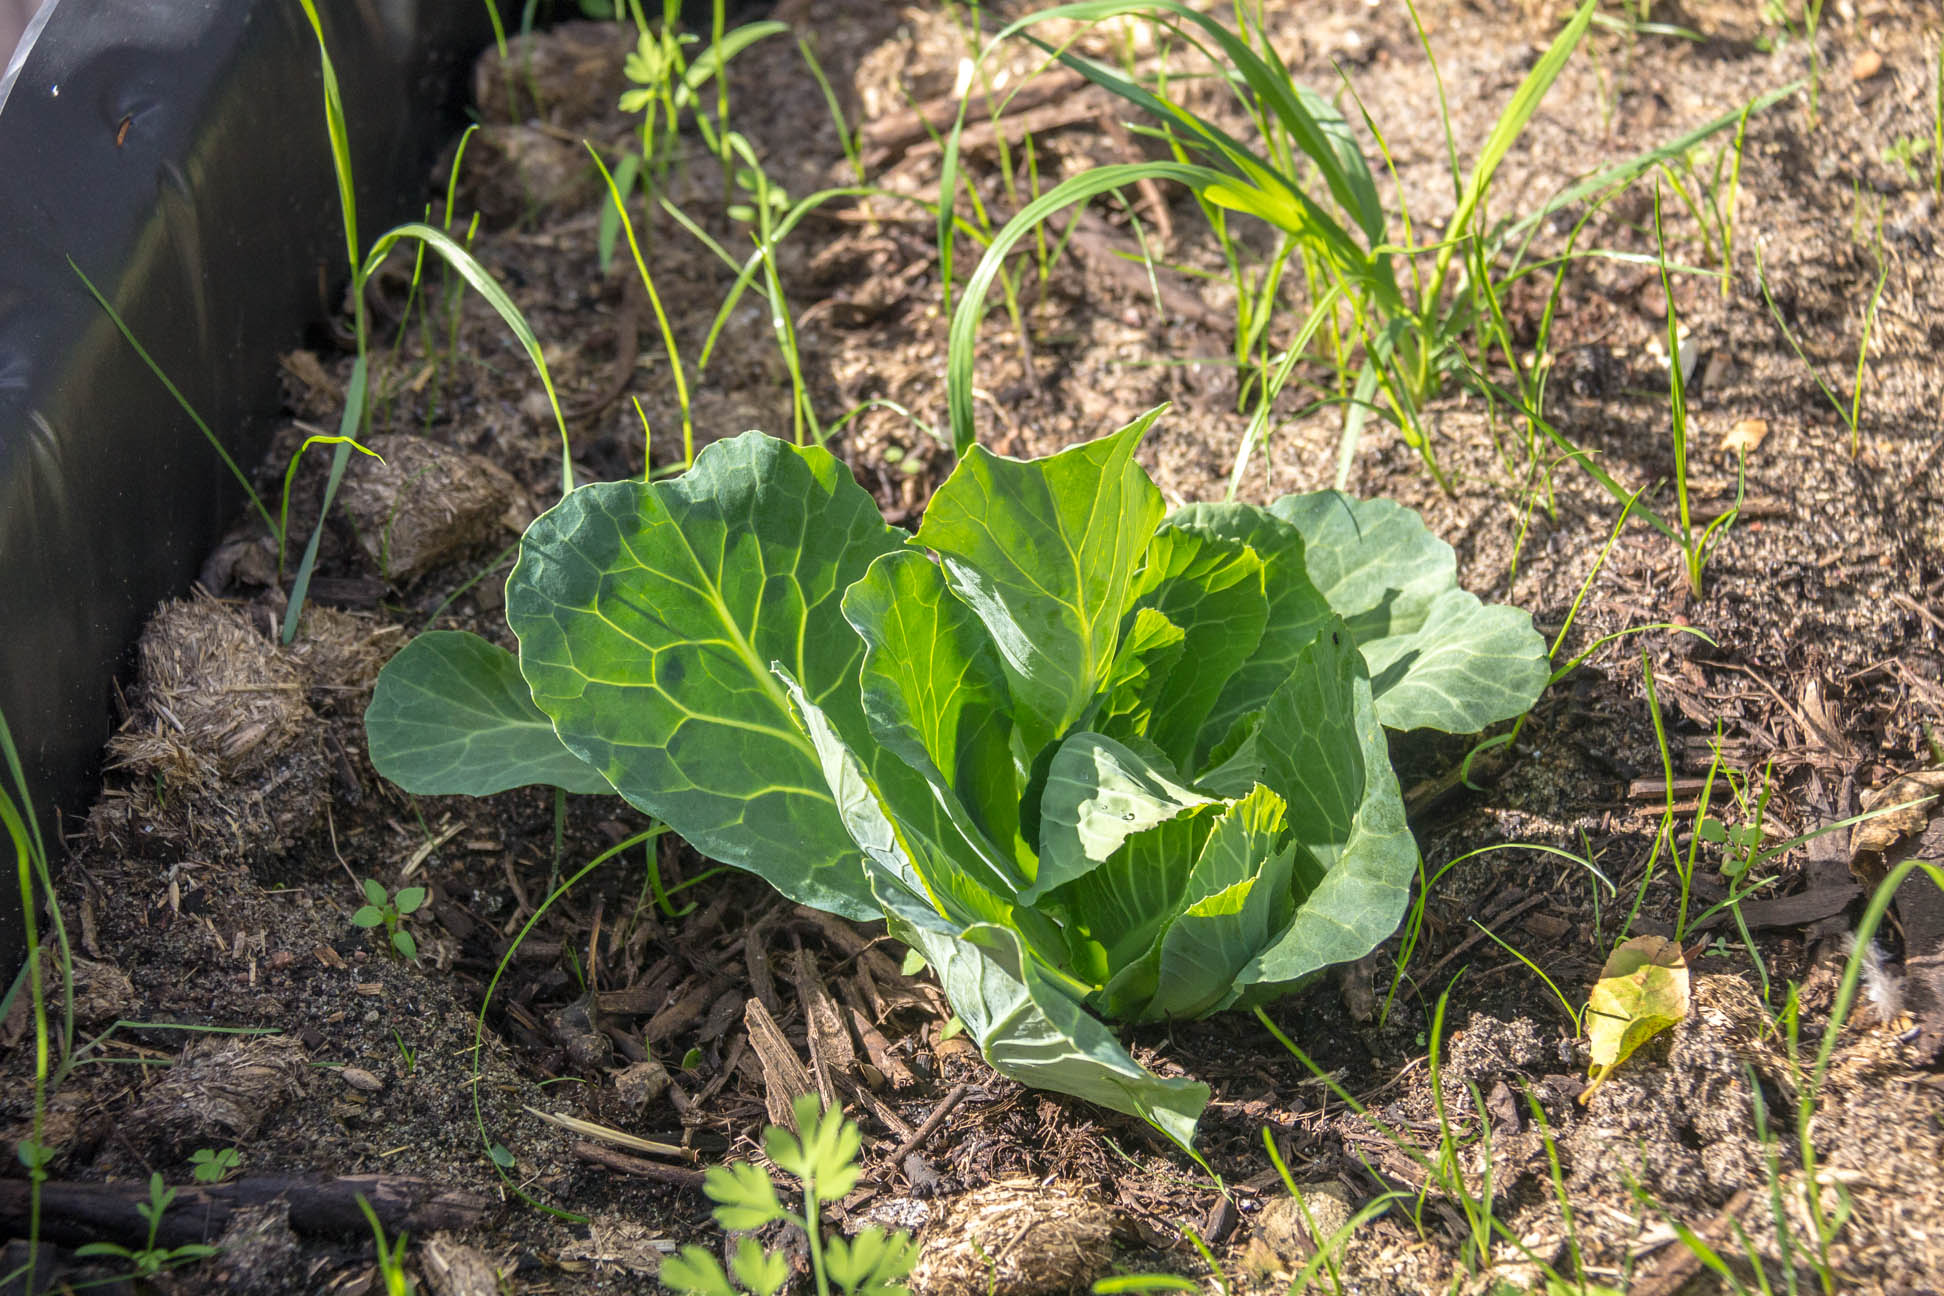 08/06/15 Day 55: The cabbage plant looks thicker